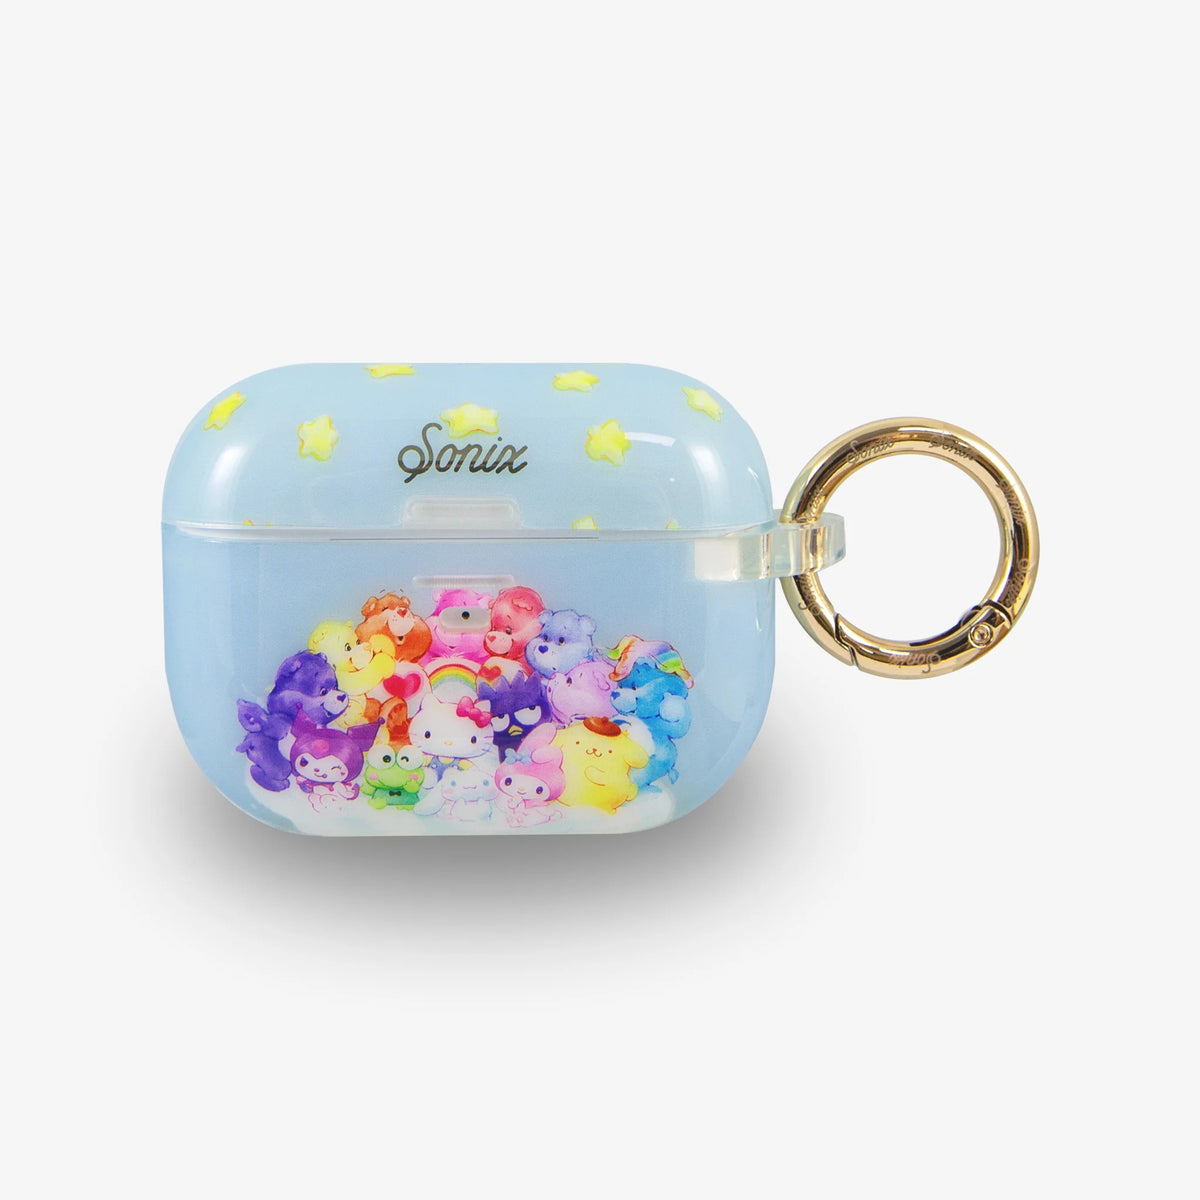 Hello Kitty and Friends x Care Bears AirPods Case Accessory BySonix Inc.   